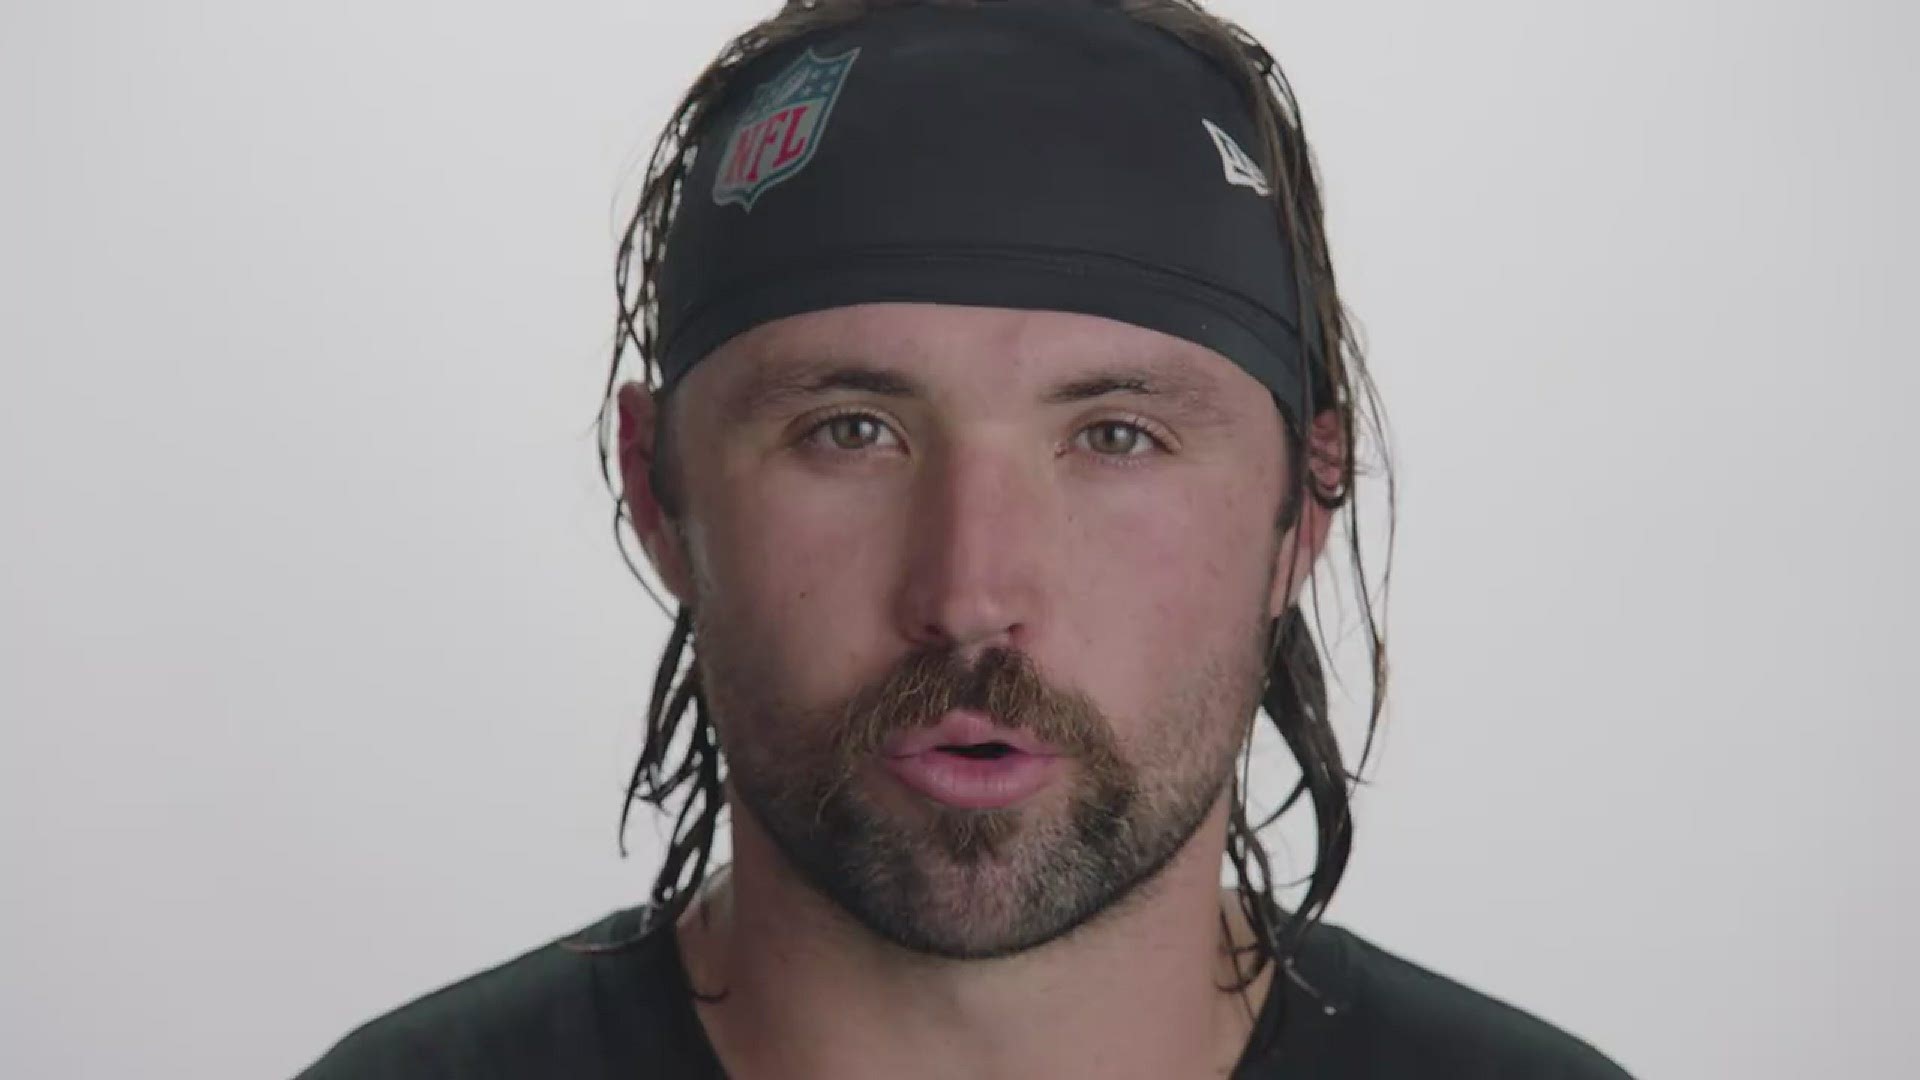 The Jaguars released a call-to-action for fans to register to vote, with a PSA featuring quarterback Gardner Minshew, saying "It's time to get in the game."